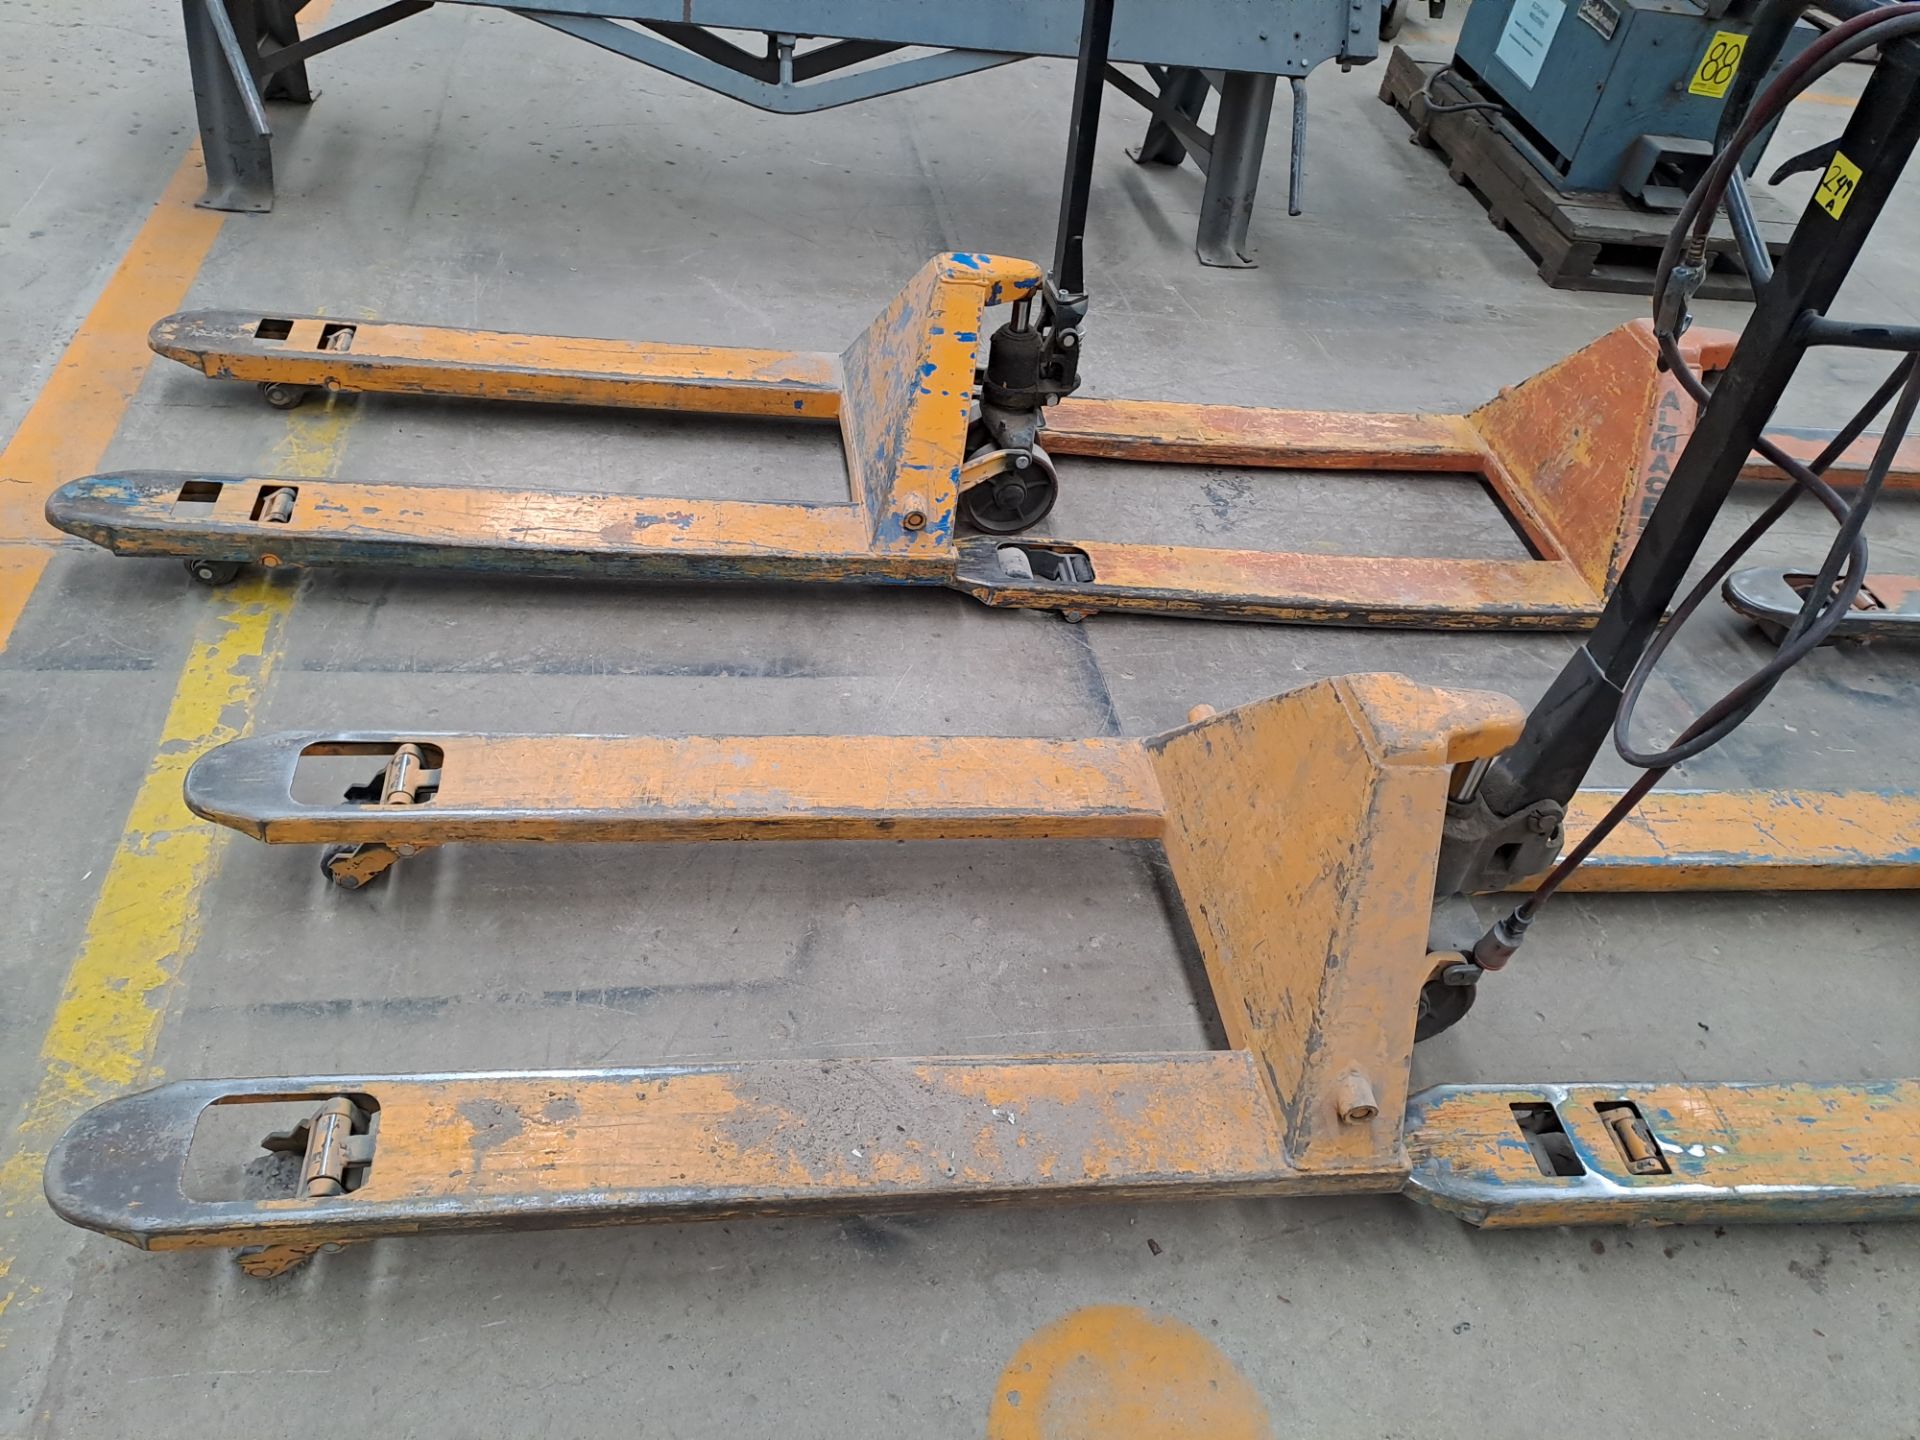 2 Hydraulic pallet truck with a maximum capacity of 5500 lbs. / 2 Traspaleta hidraulica con capacid - Image 2 of 5